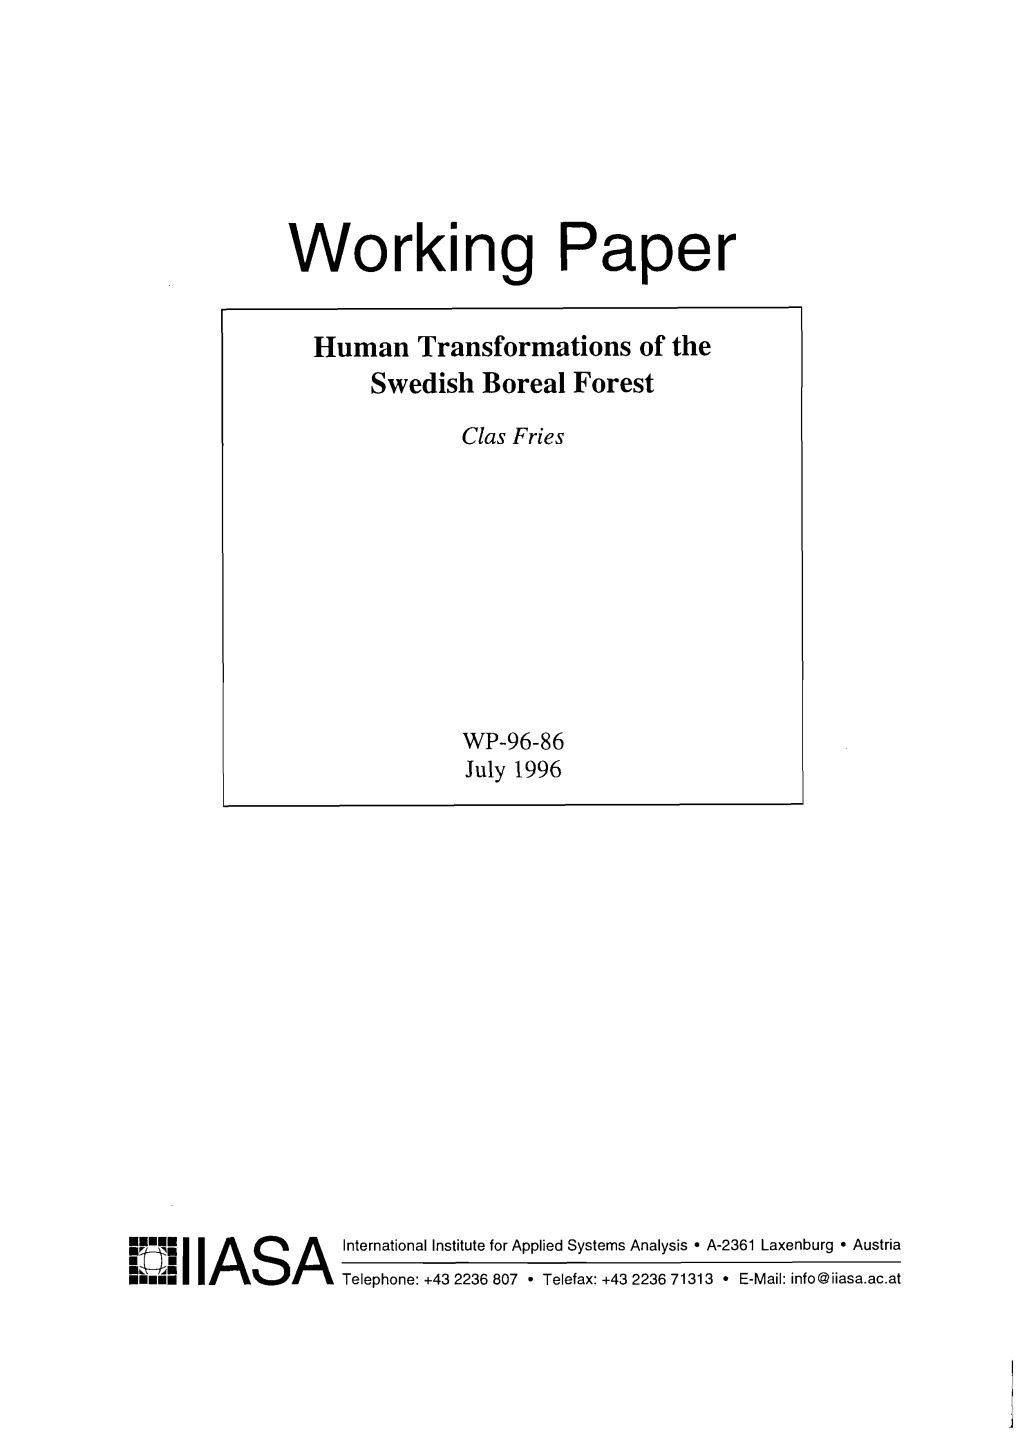 Human Transformations of ,The Swedish Boreal Forest